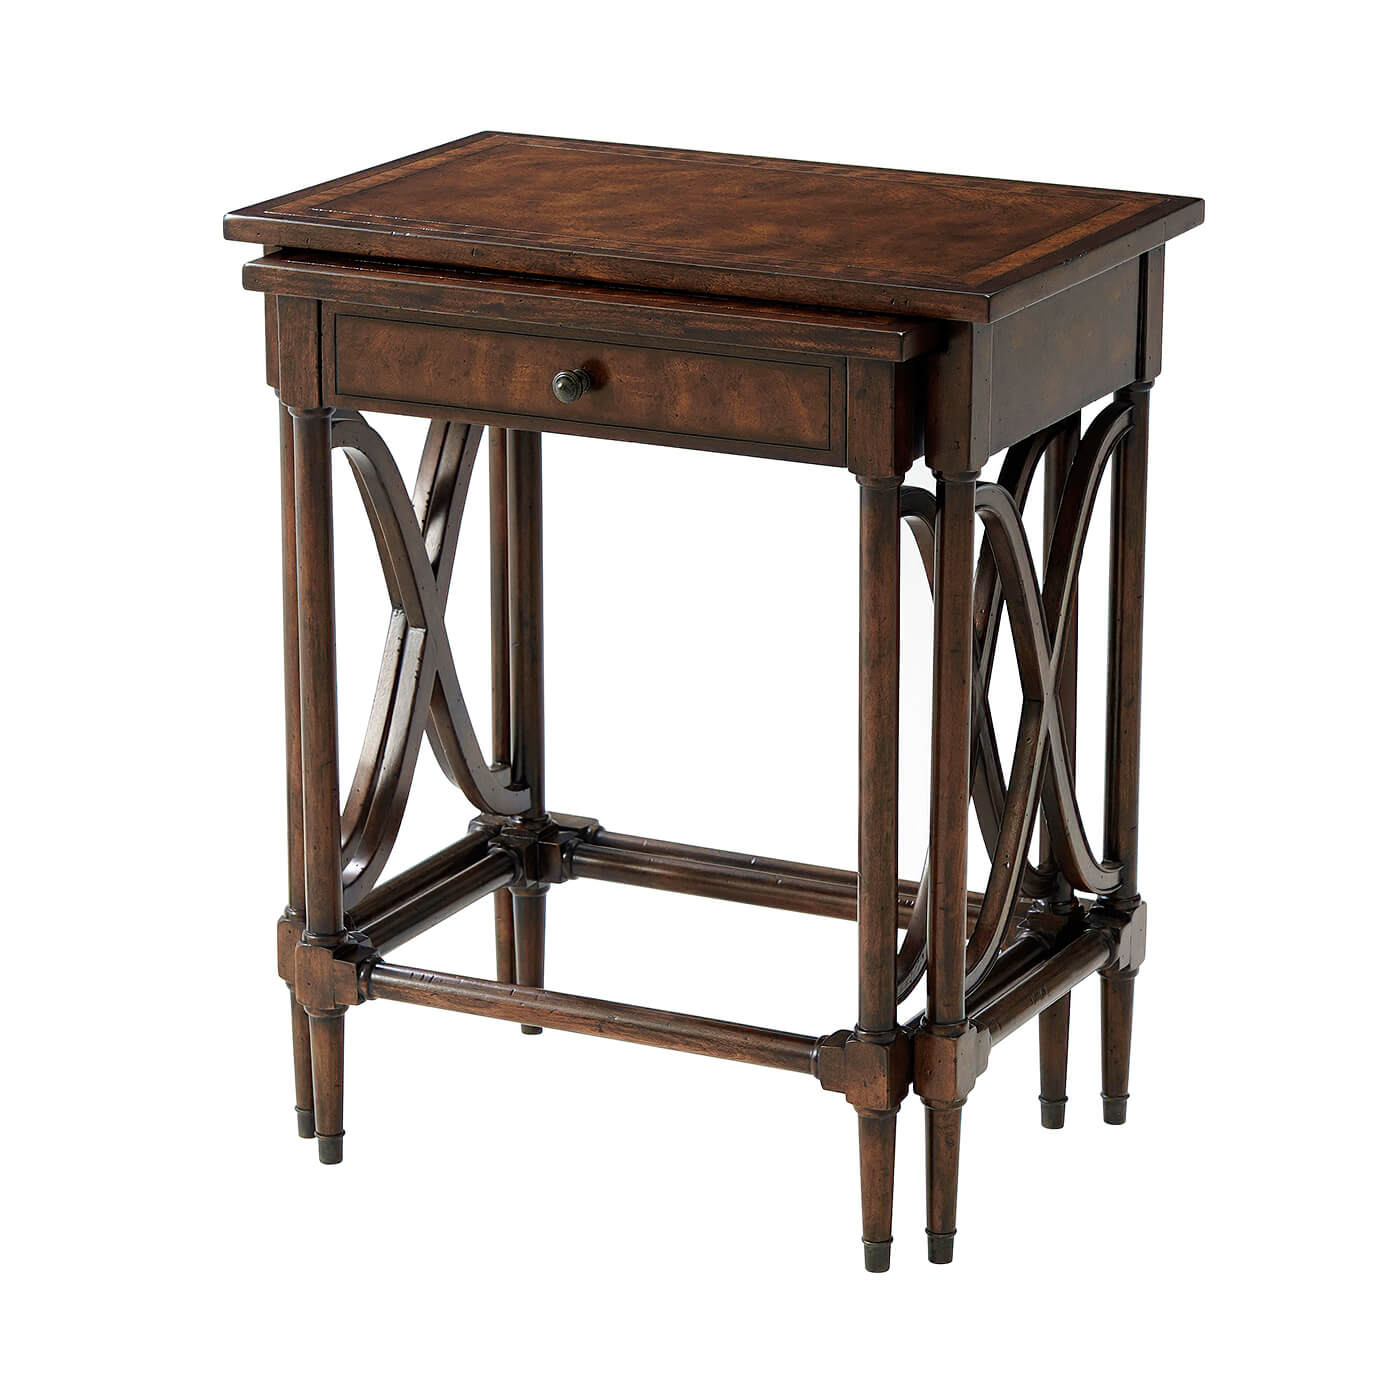 Antiqued Mahogany Nest of Two Tables - English Georgian America